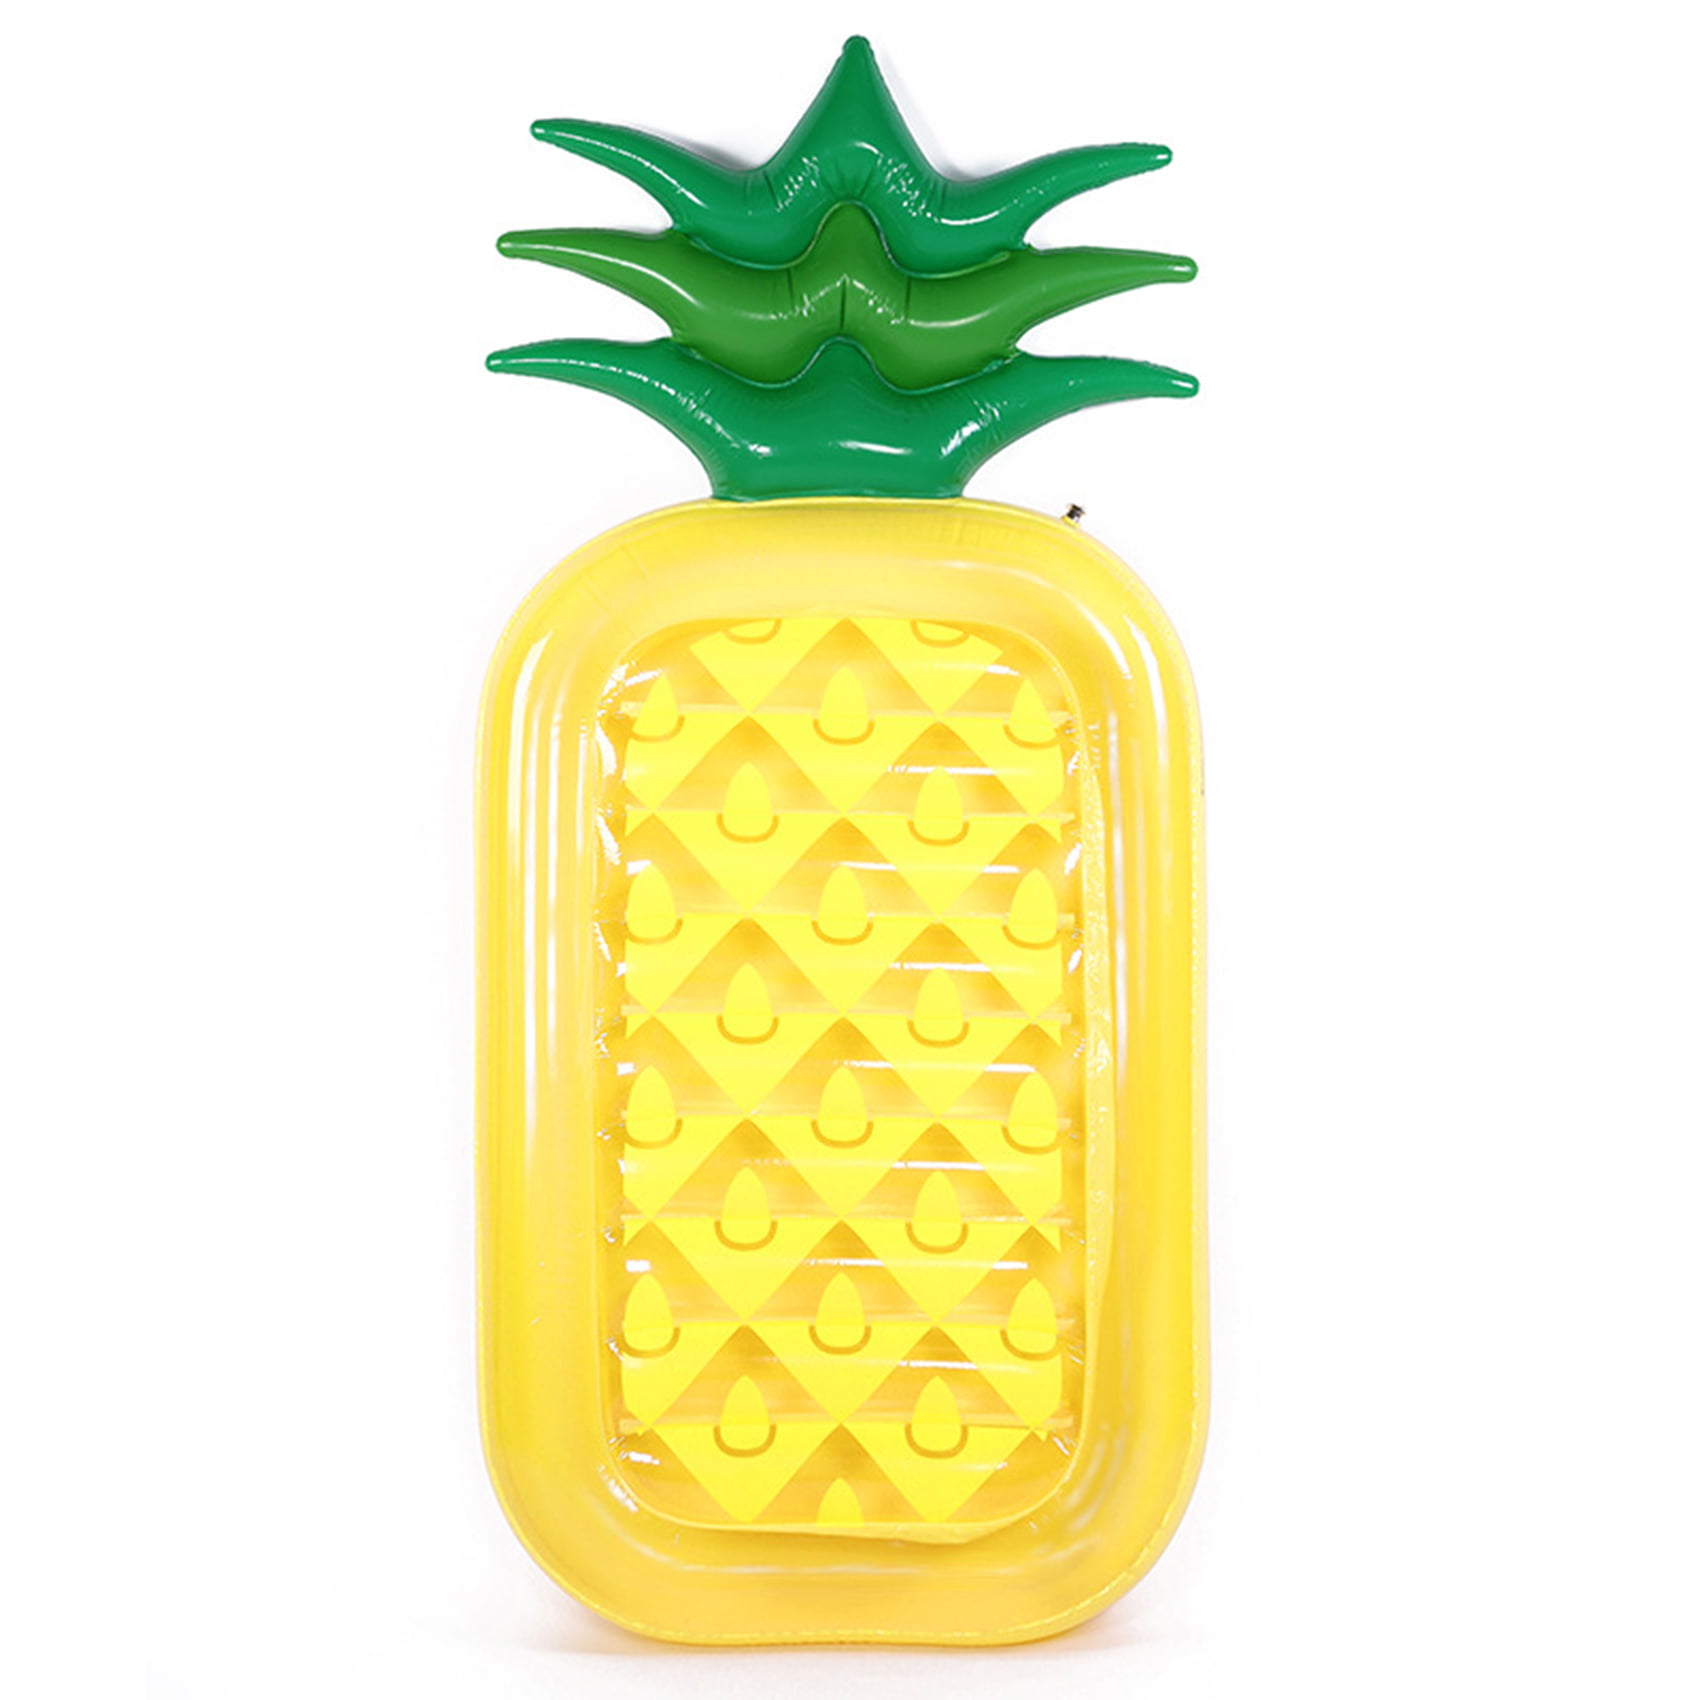 NEW PINEAPPLE INFLATABLE FLOAT FUN BEACH LOUNGER SWIMMING POOL AIR TUBES WATER